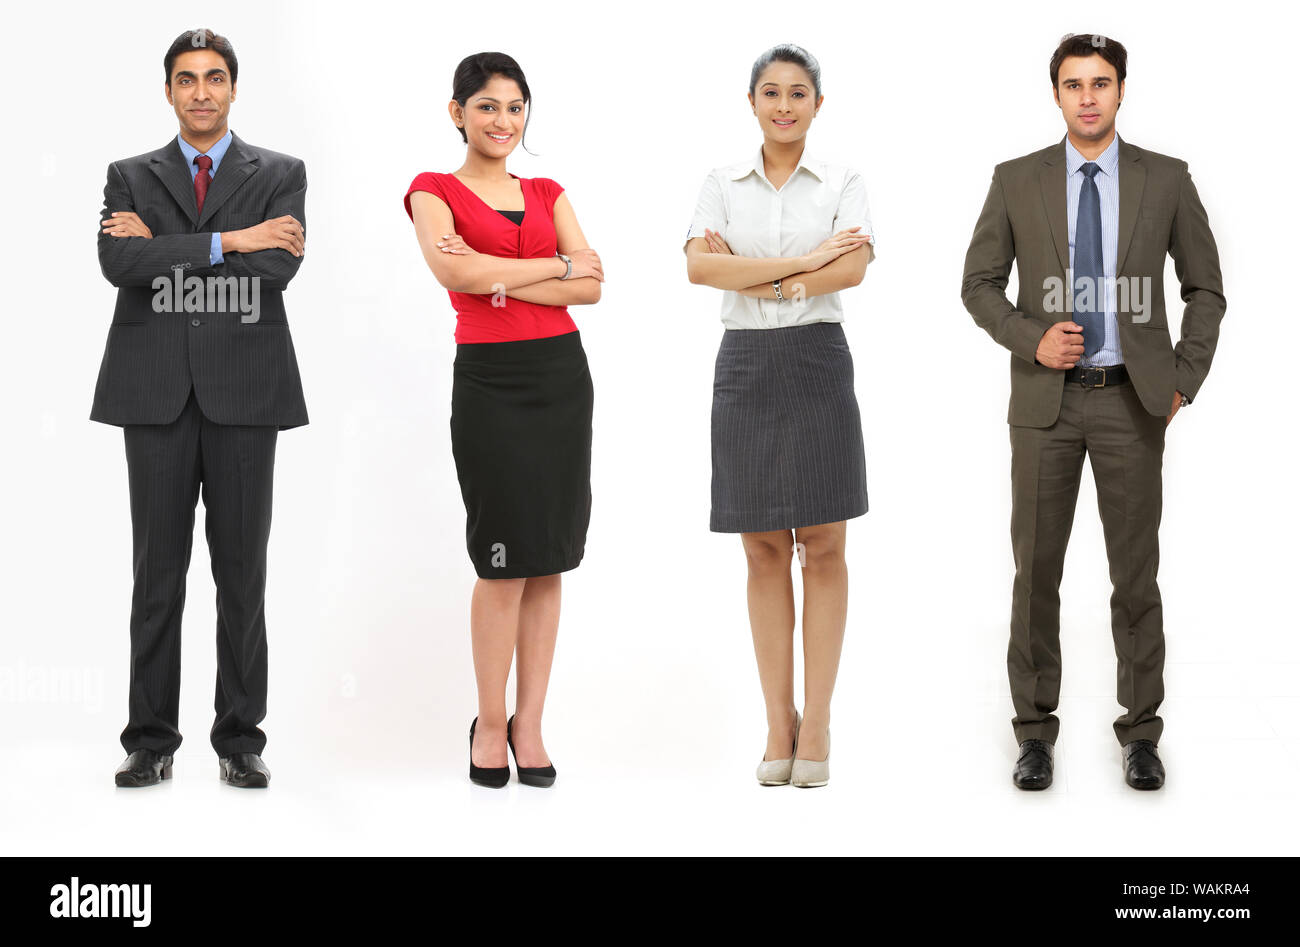 Business executives standing togetherness Stock Photo